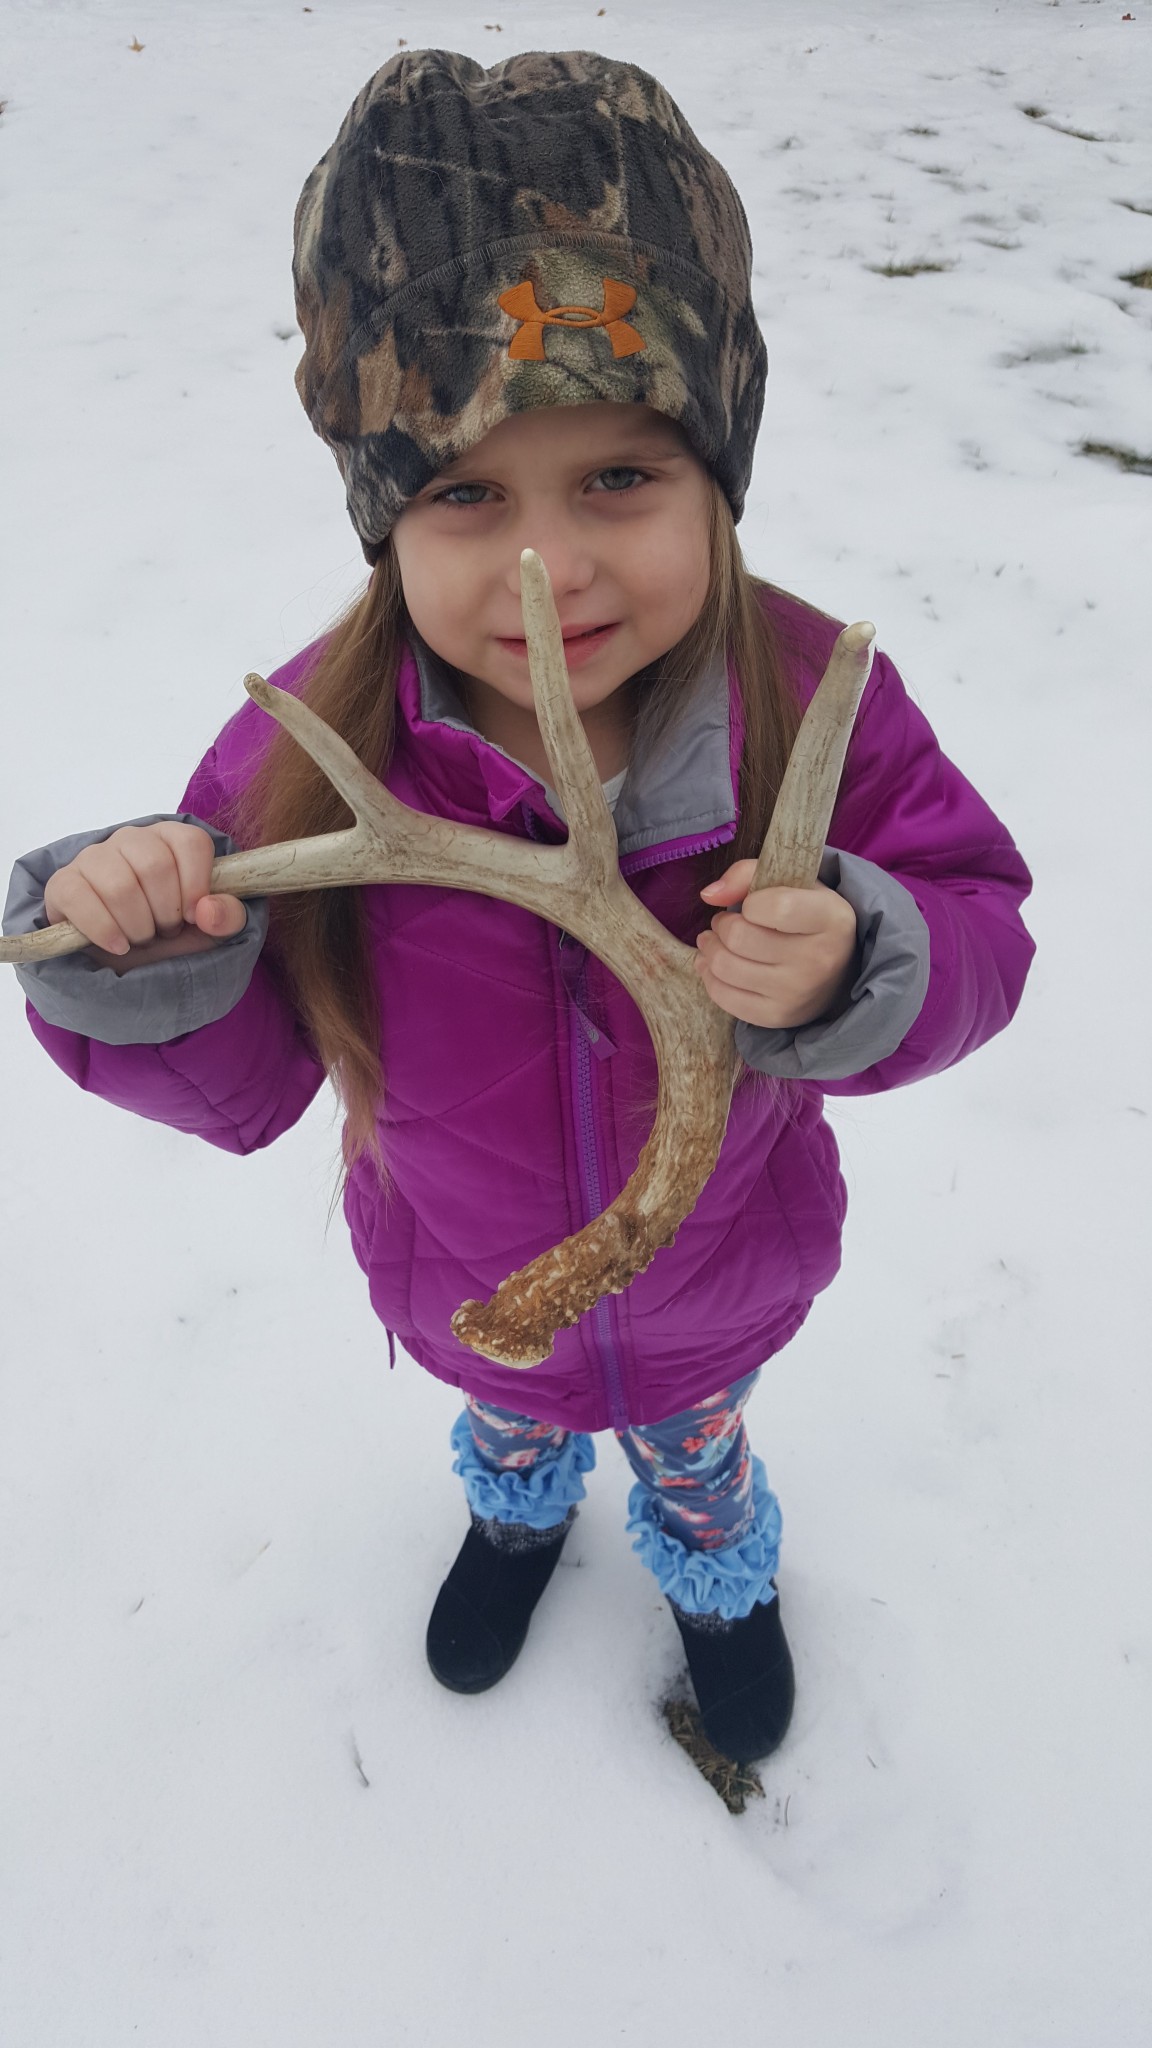 Maddie Pierce with Shed Antler. Photo by Greg Wagner.